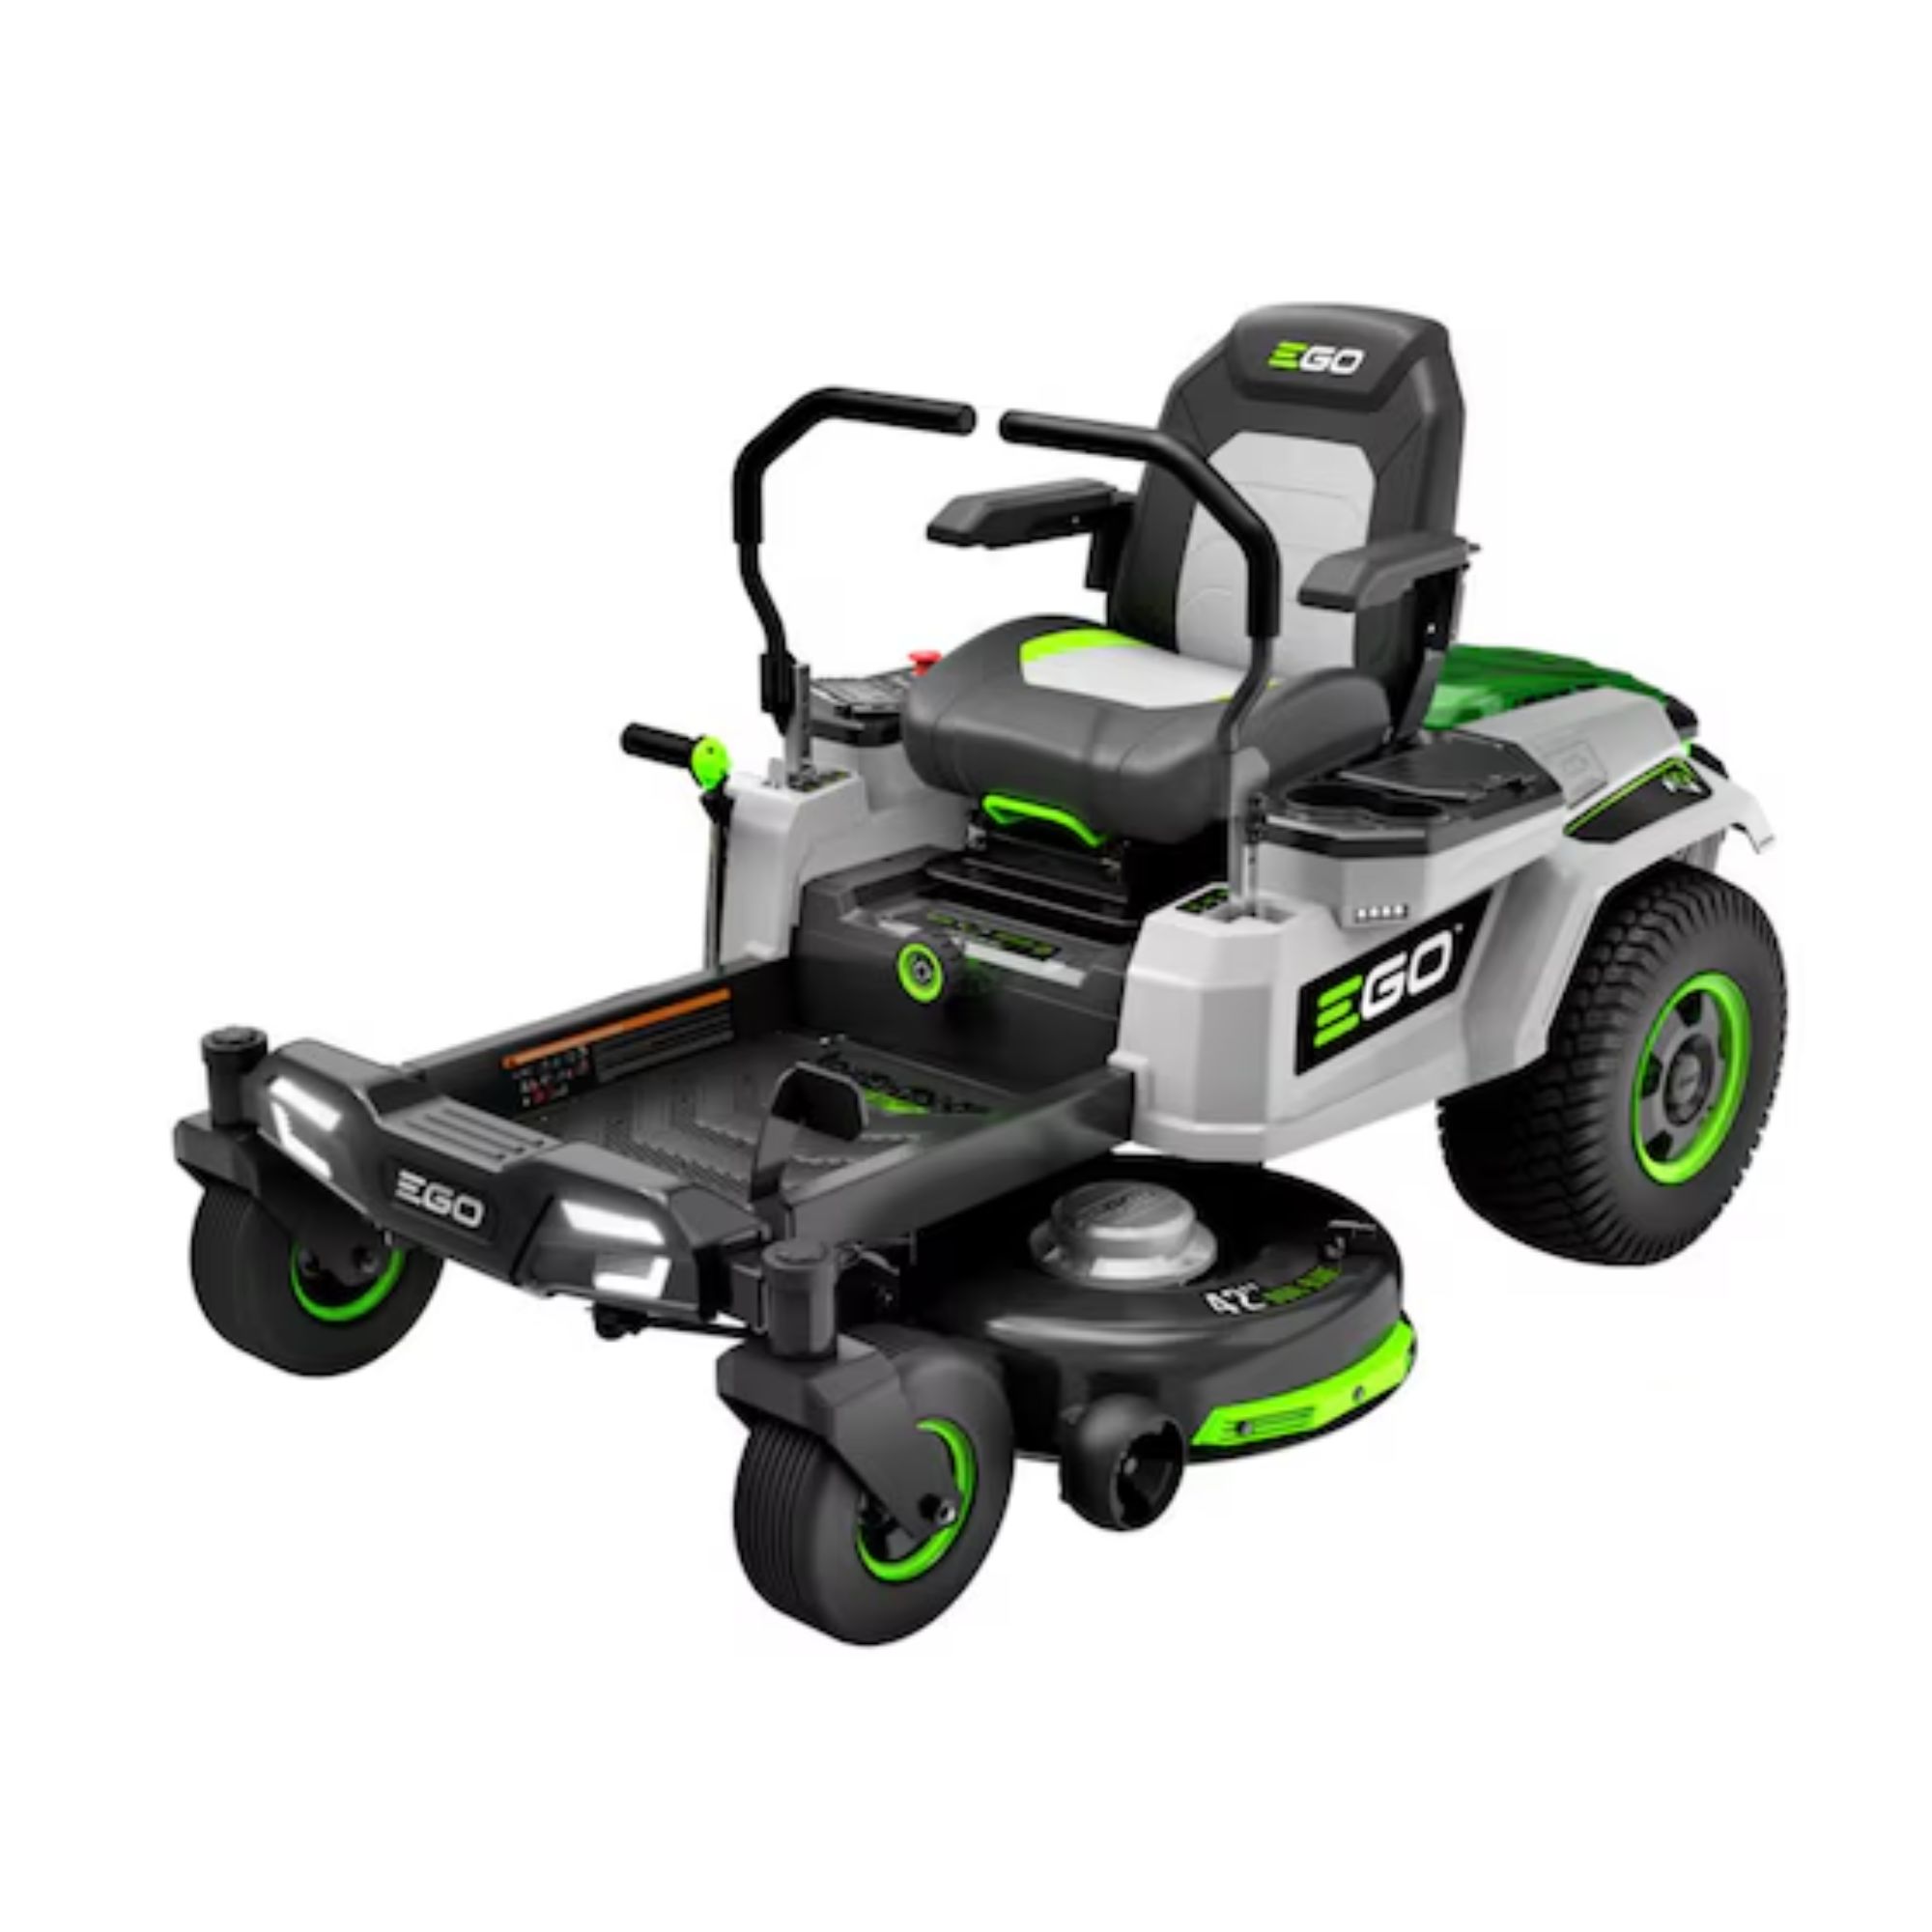 A EGO POWER+ Z6 42-in 56-volt Lithium Ion Electric Riding Lawn Mower